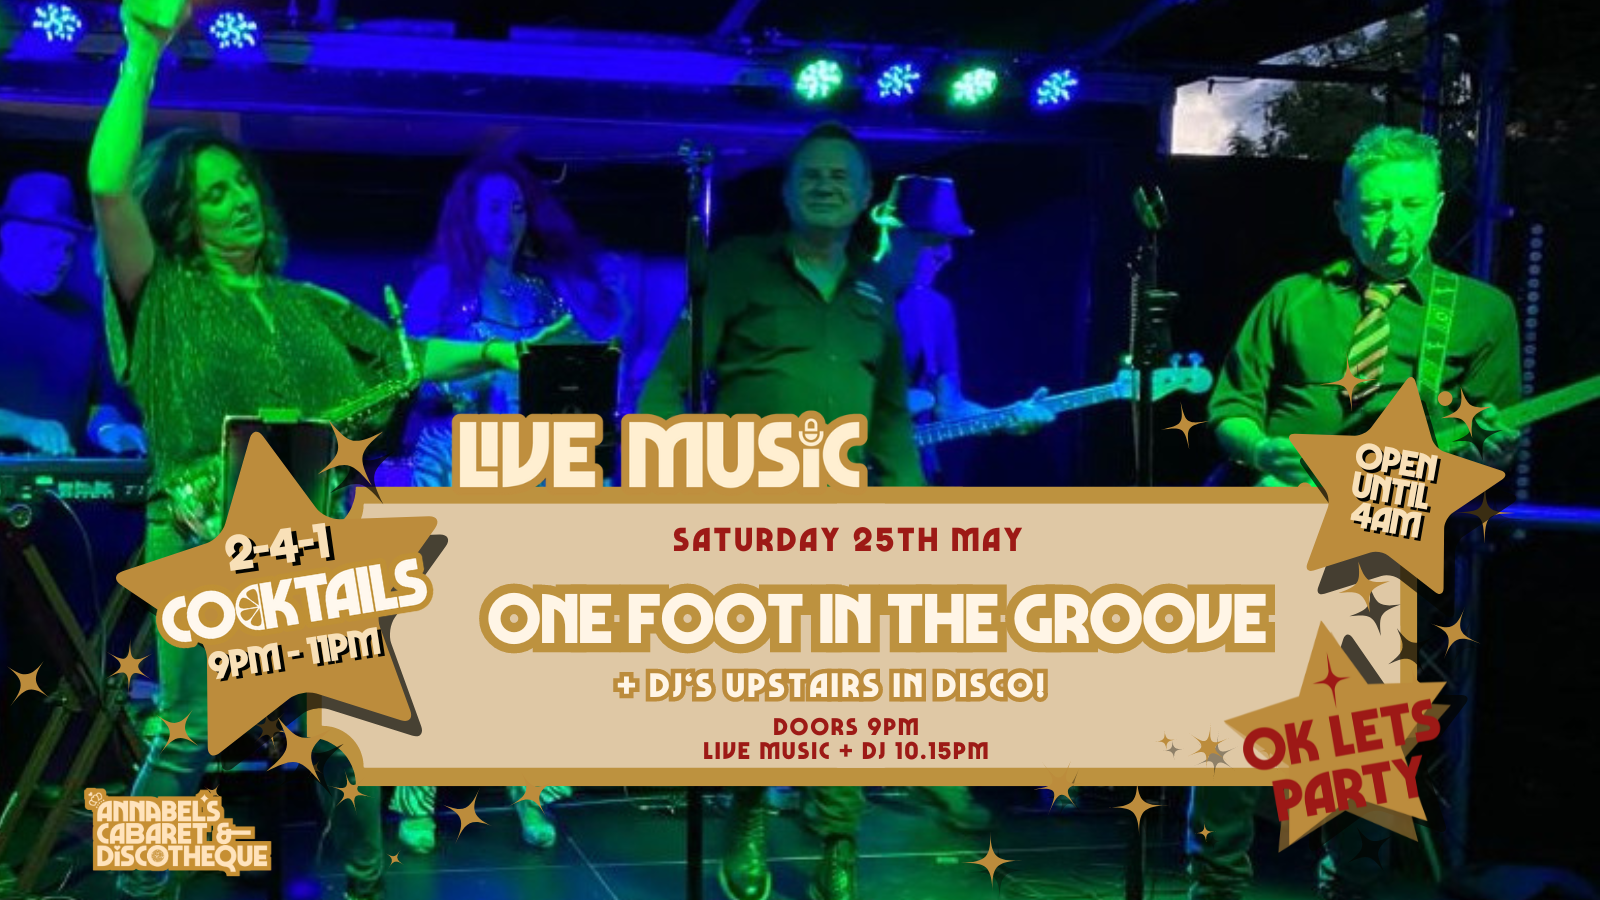 Live Music: ONE FOOT IN THE GROOVE // Annabel’s Cabaret & Discotheque